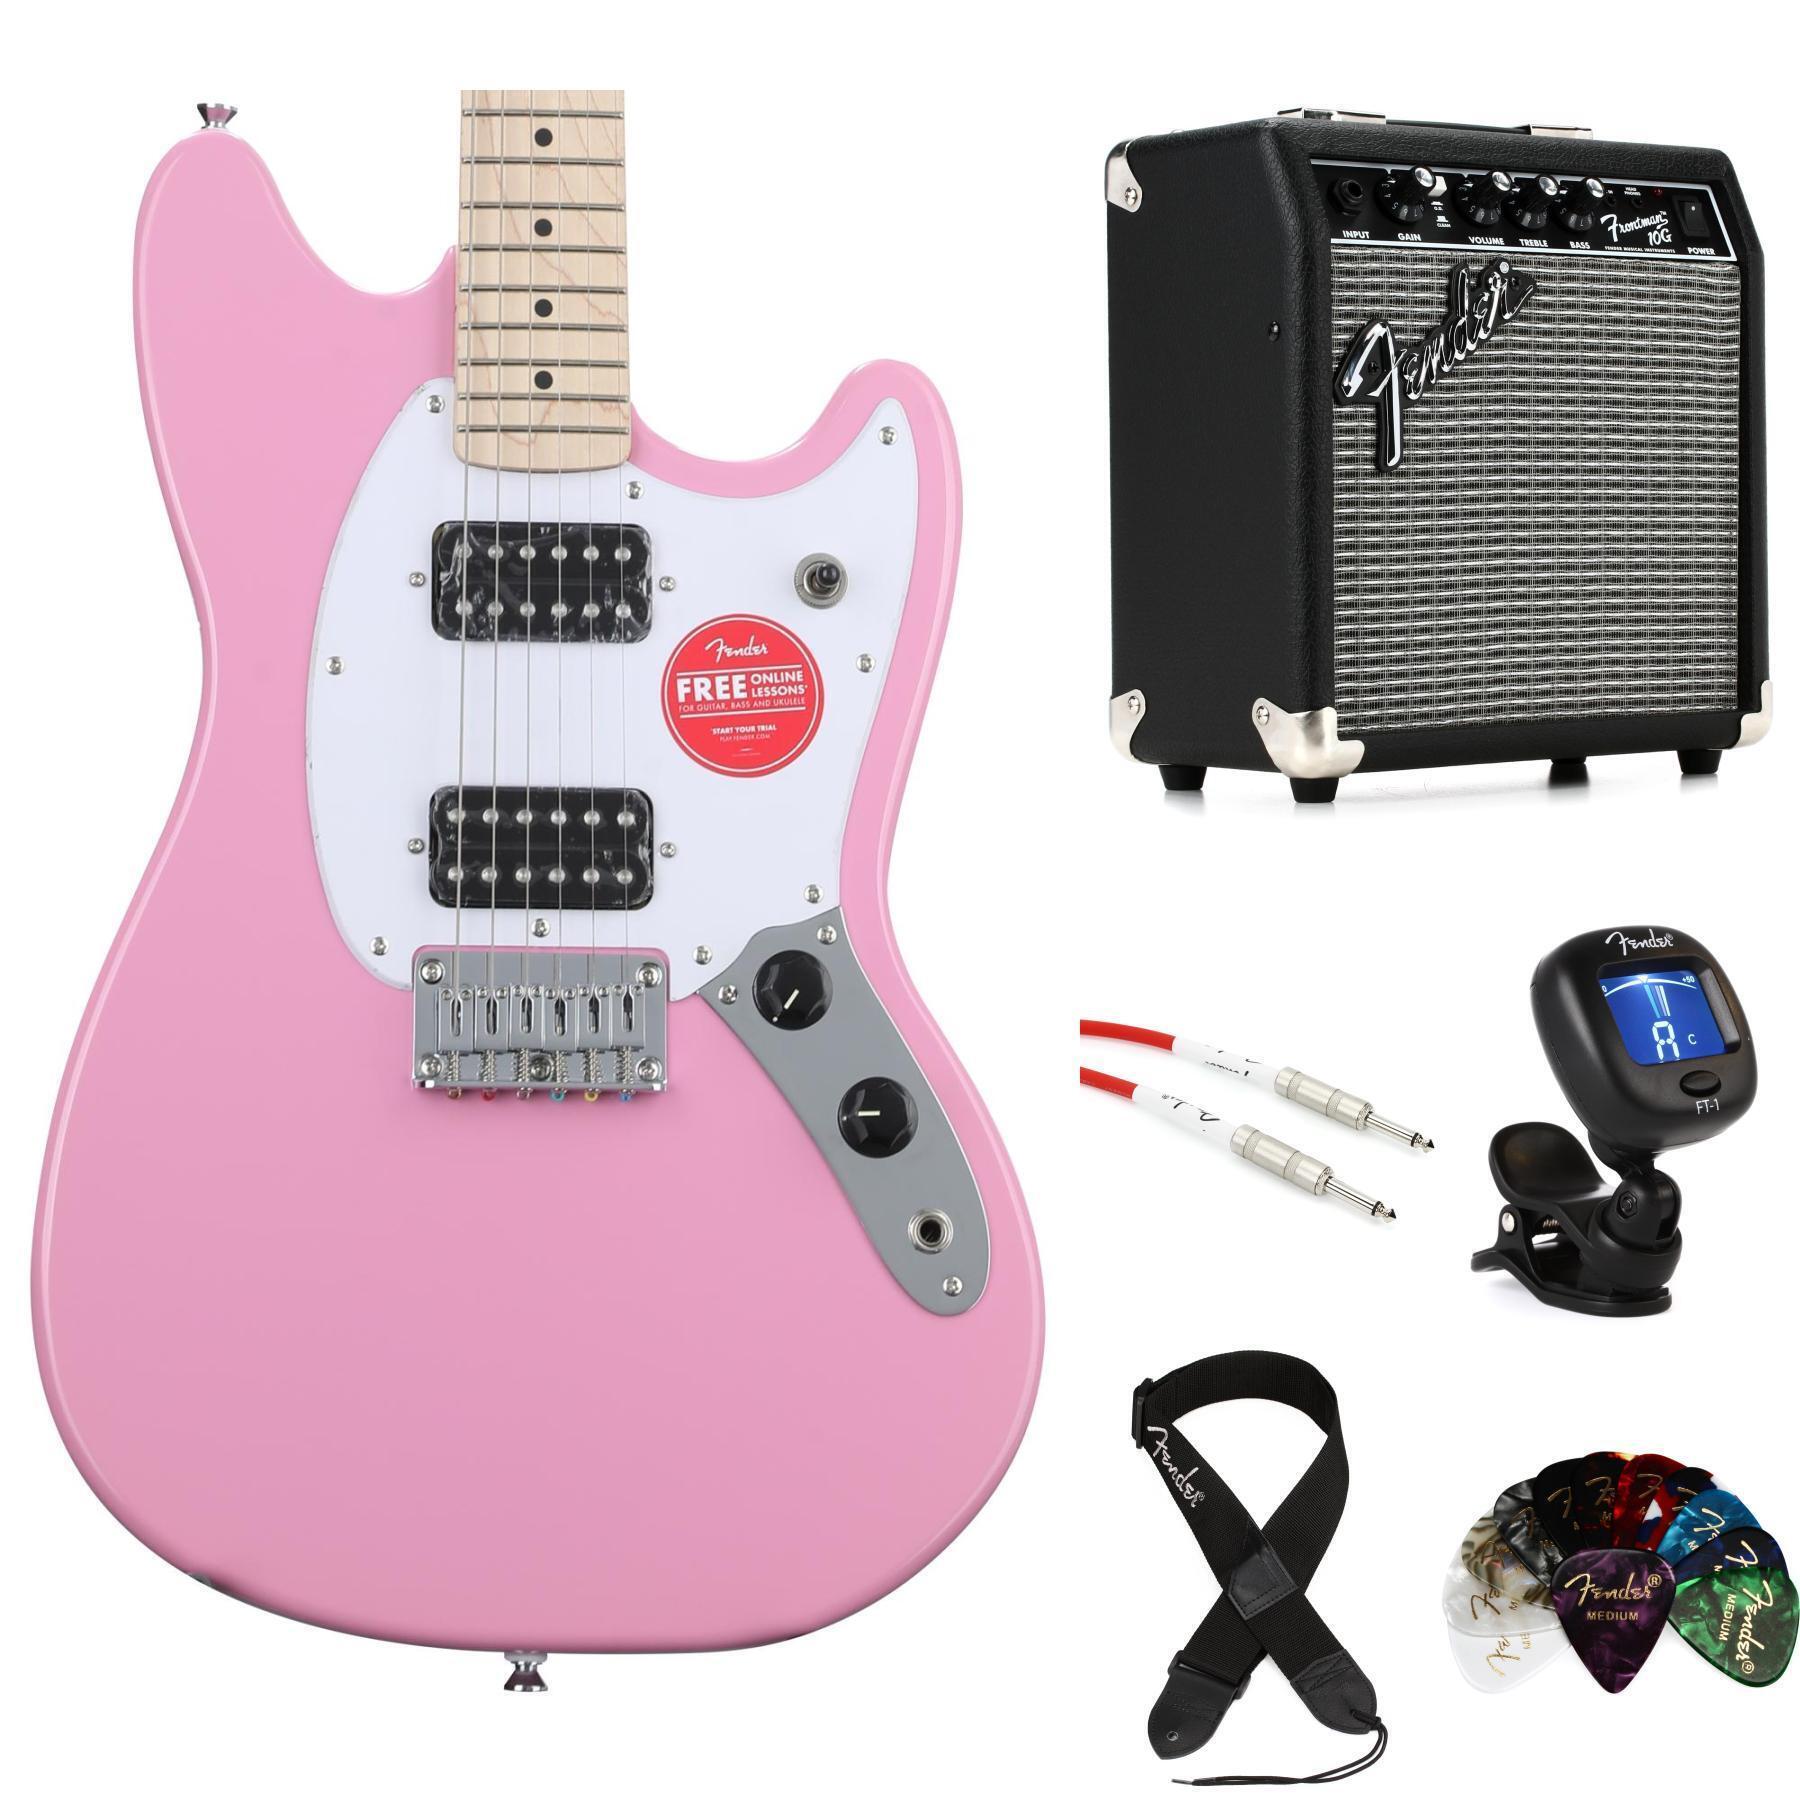 Squier Sonic Mustang HH Solidbody Electric Guitar - Flash Pink 